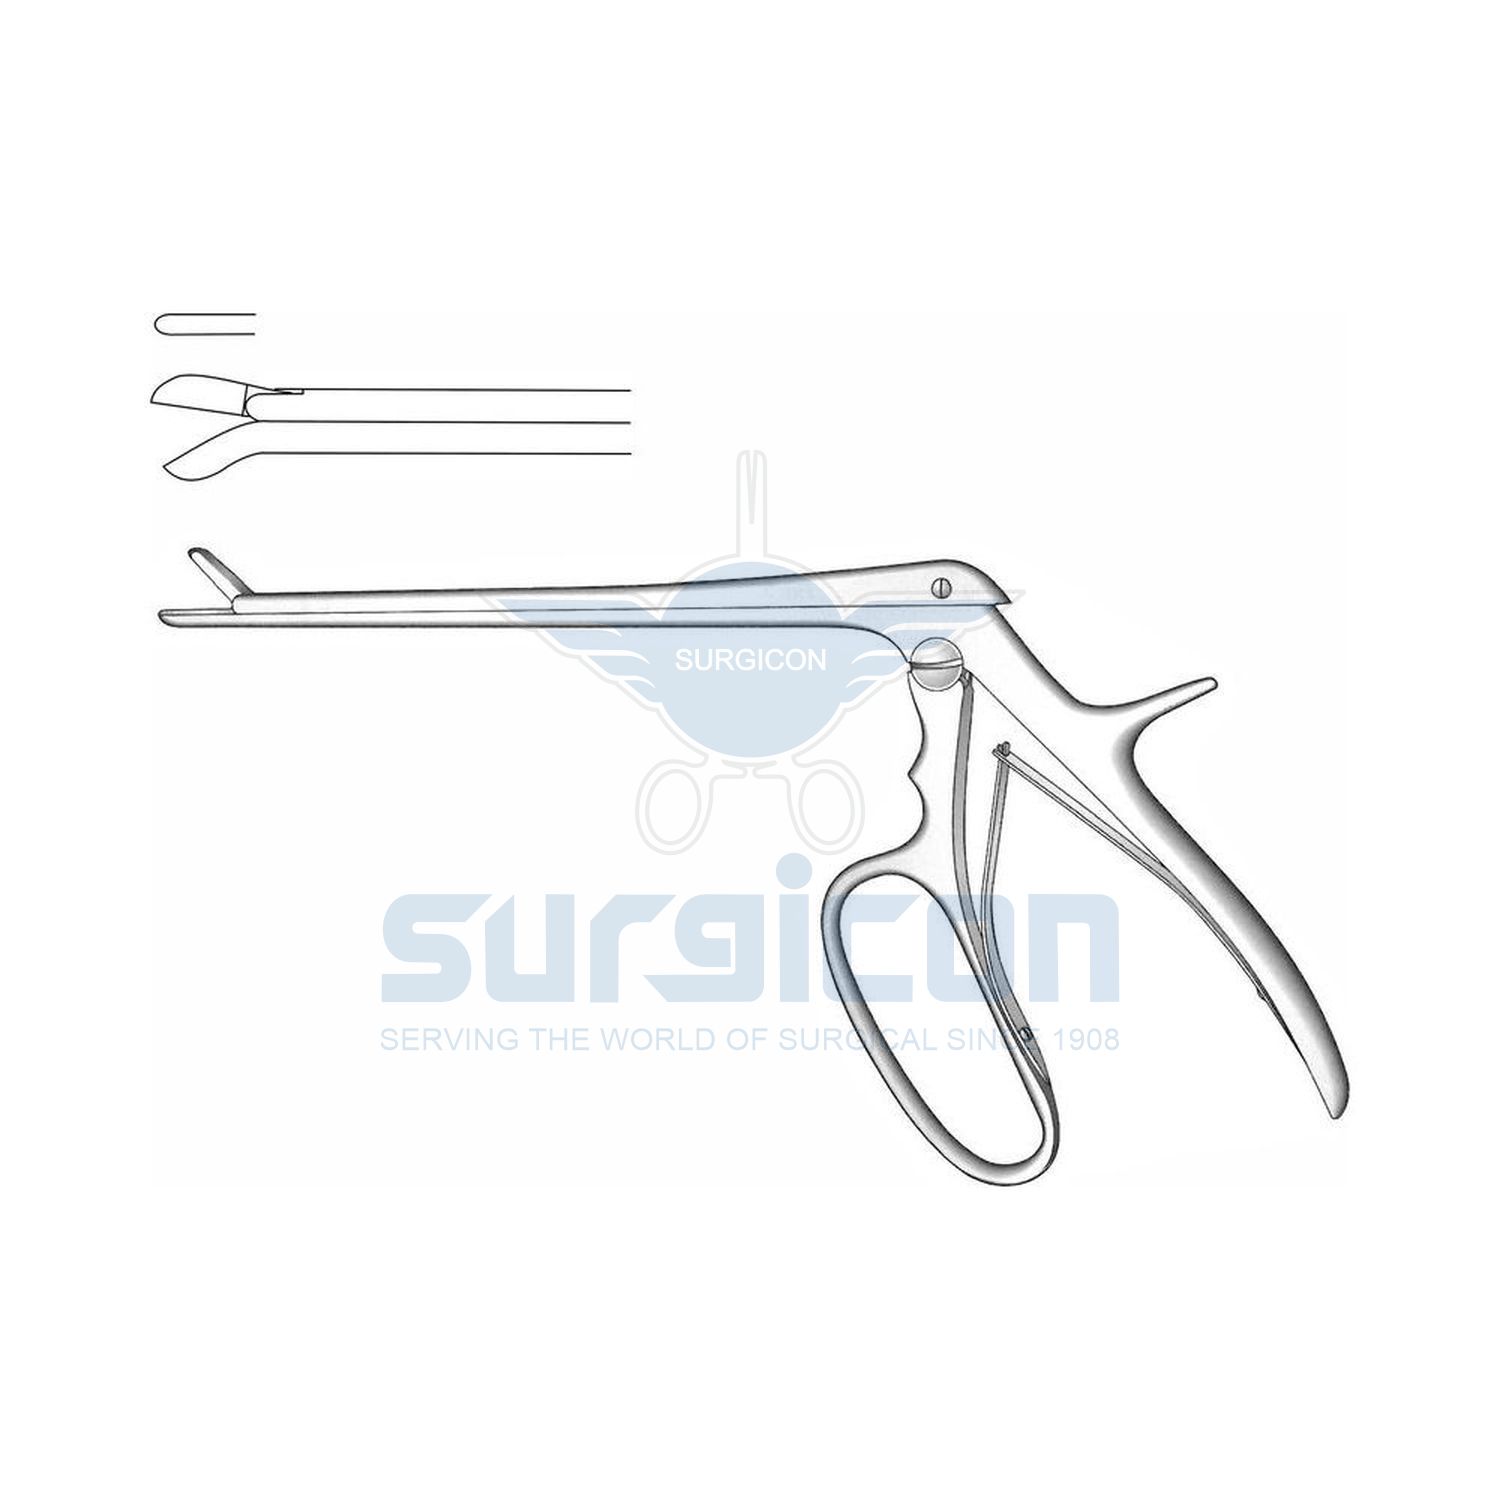 Ferris-Smith-Chusing-Punches-and-Rongeur-Forcep-J-32-1088